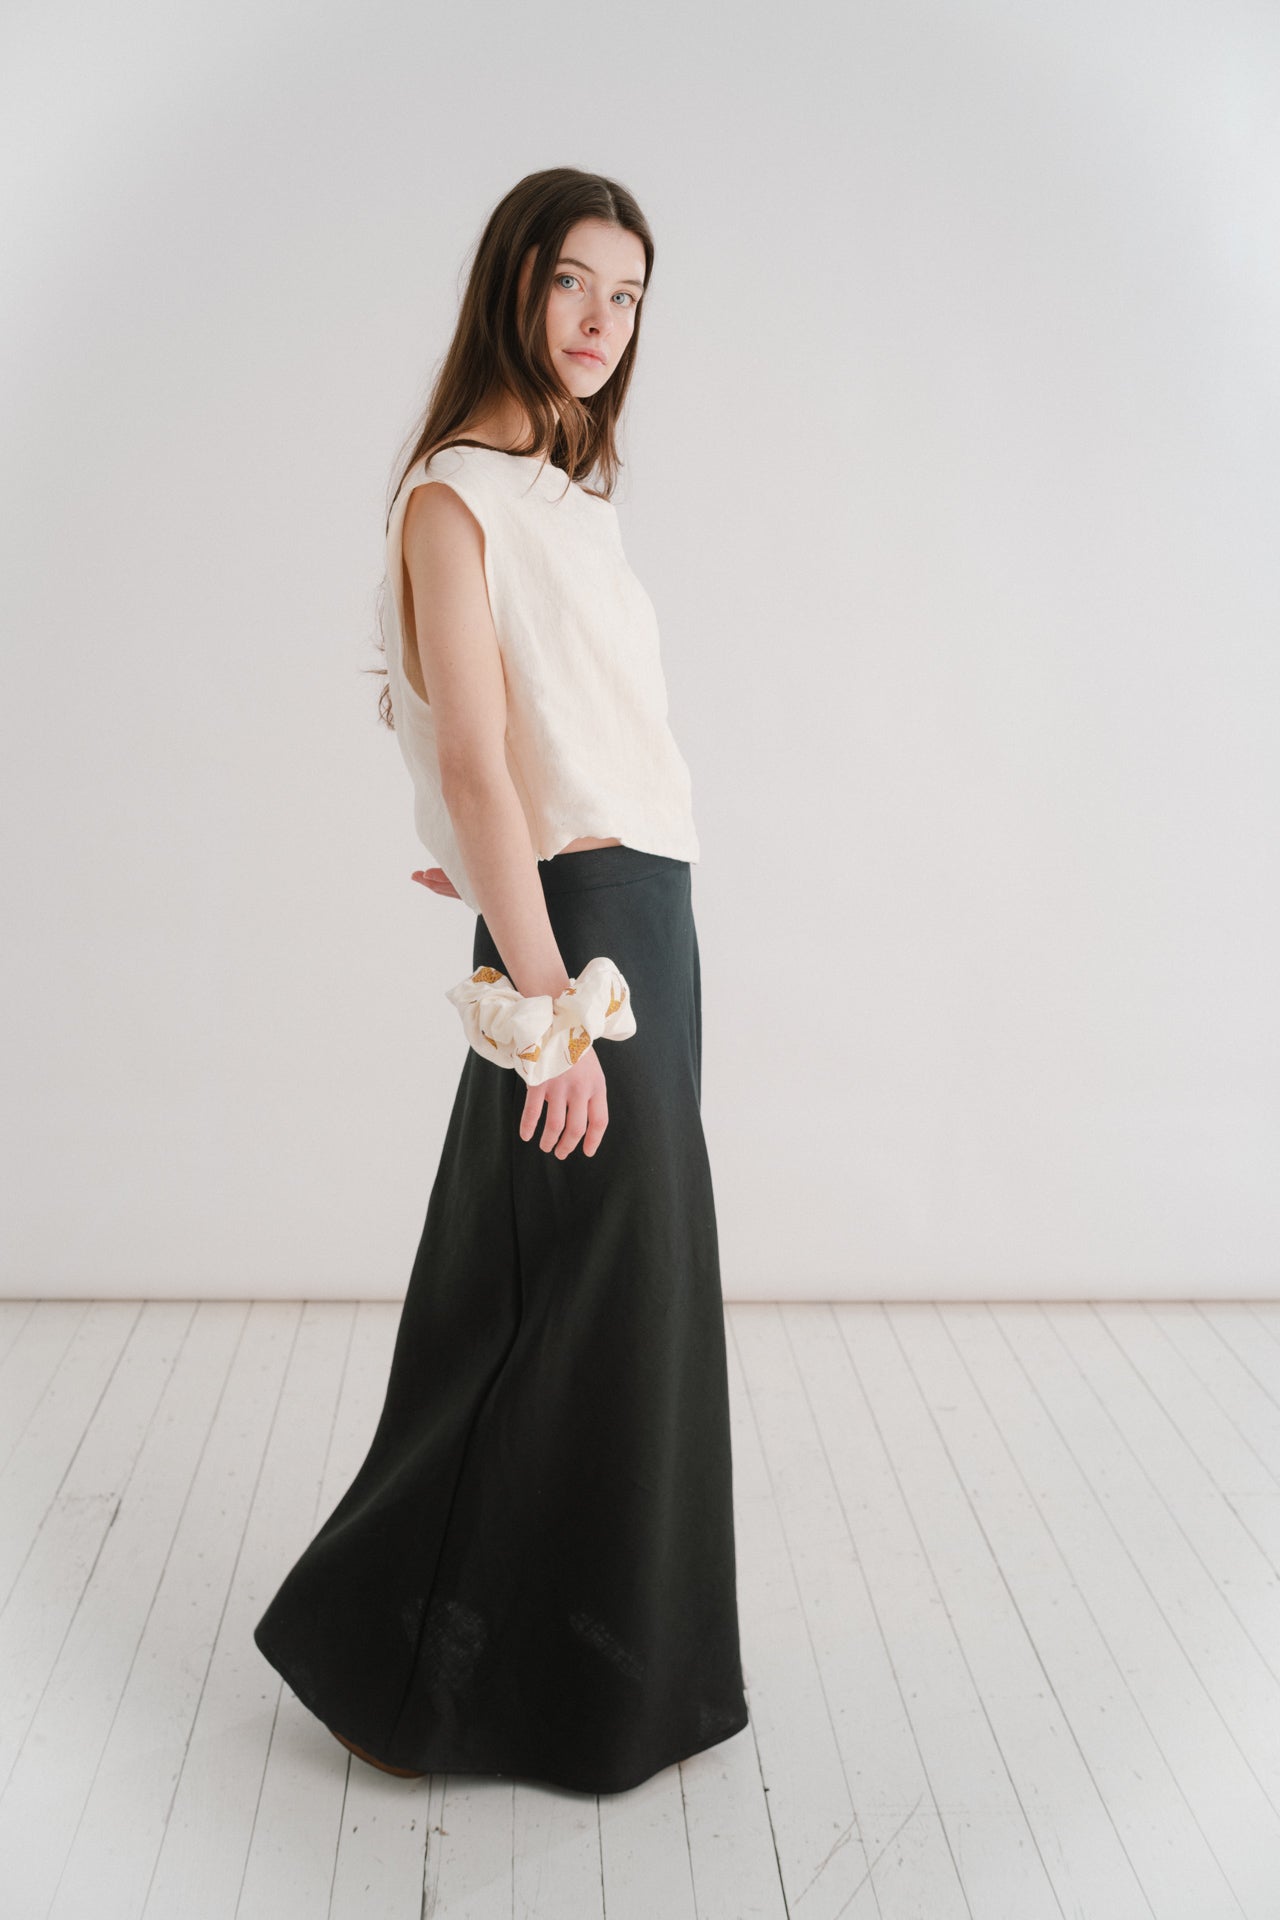 THE EVERYTHING SKIRT - BLACK | A new staple for SS24, the ‘everything’ skirt lives up to her name. An elegant bias cut makes this one feel really special to wear, whether you are pairing it with a simple tee, knit or our Evie top and heels for a more elev